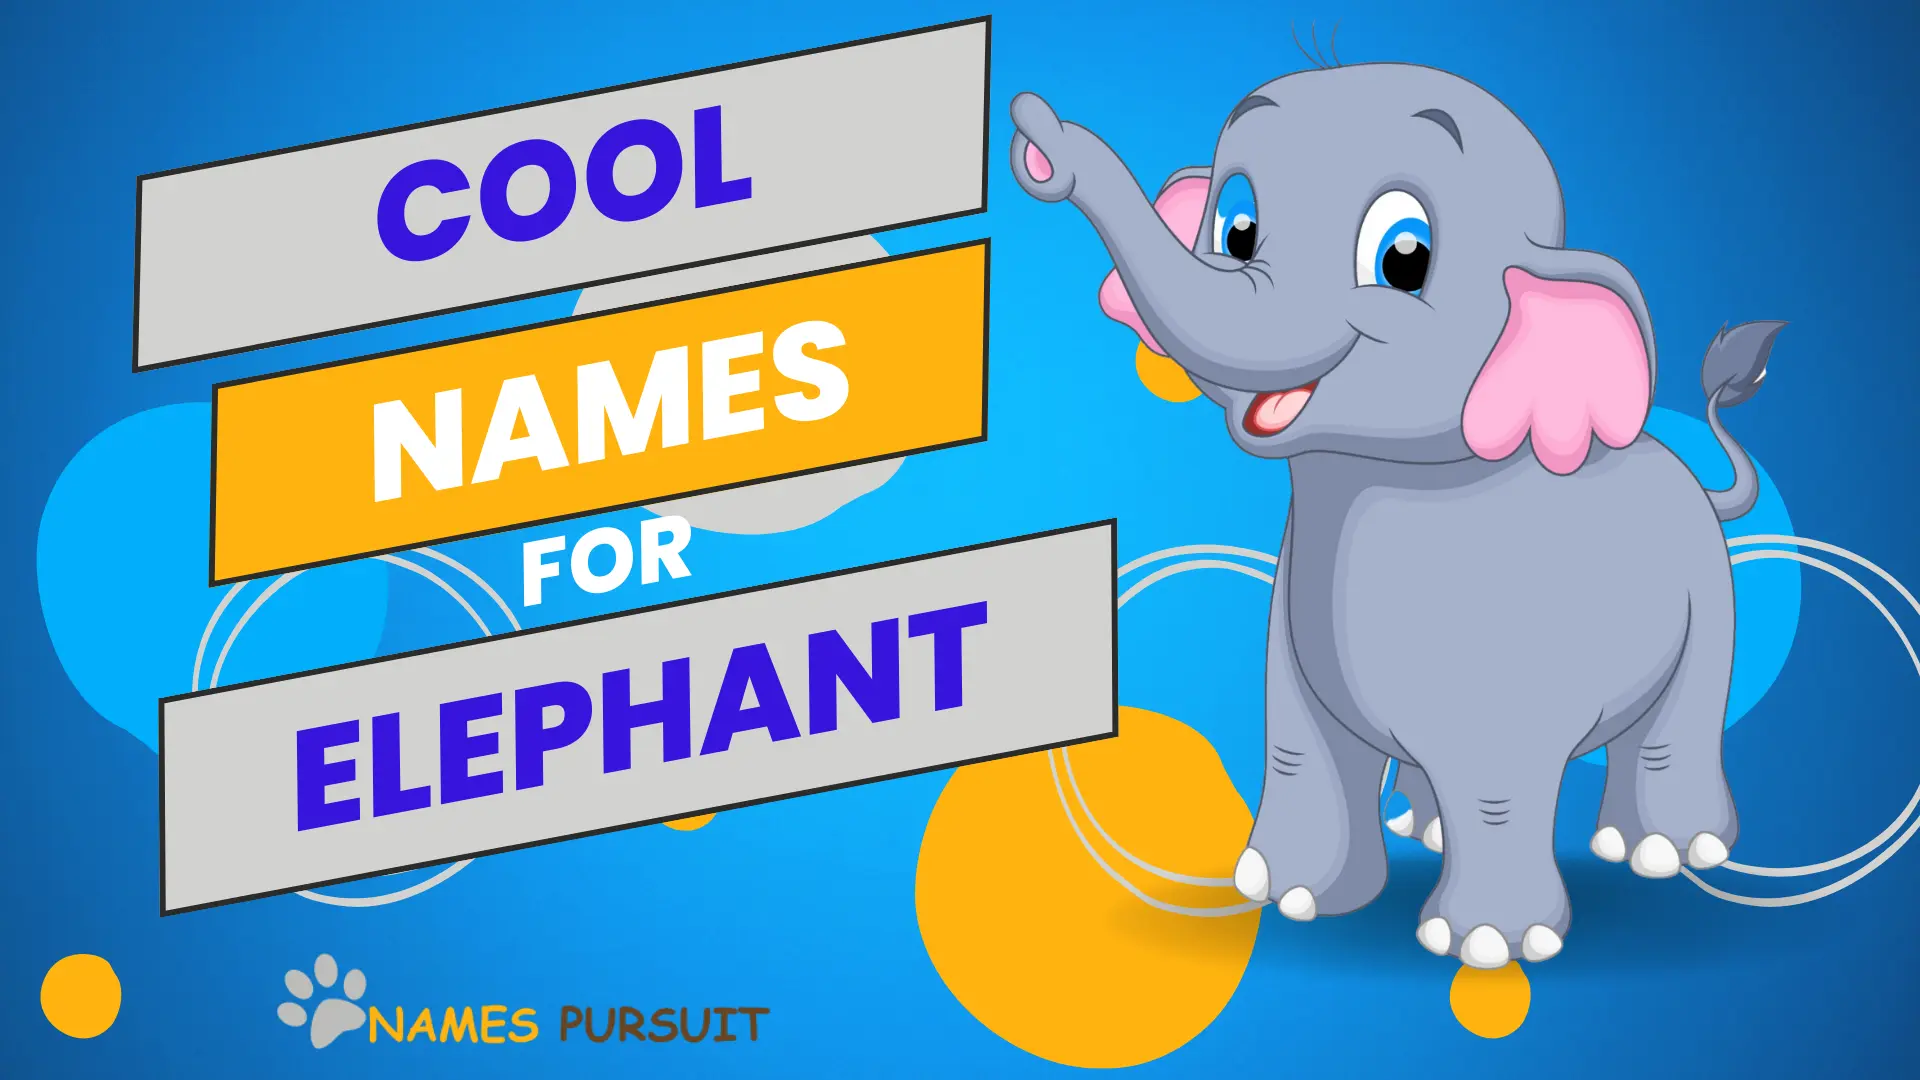 Cool Names for Elephants